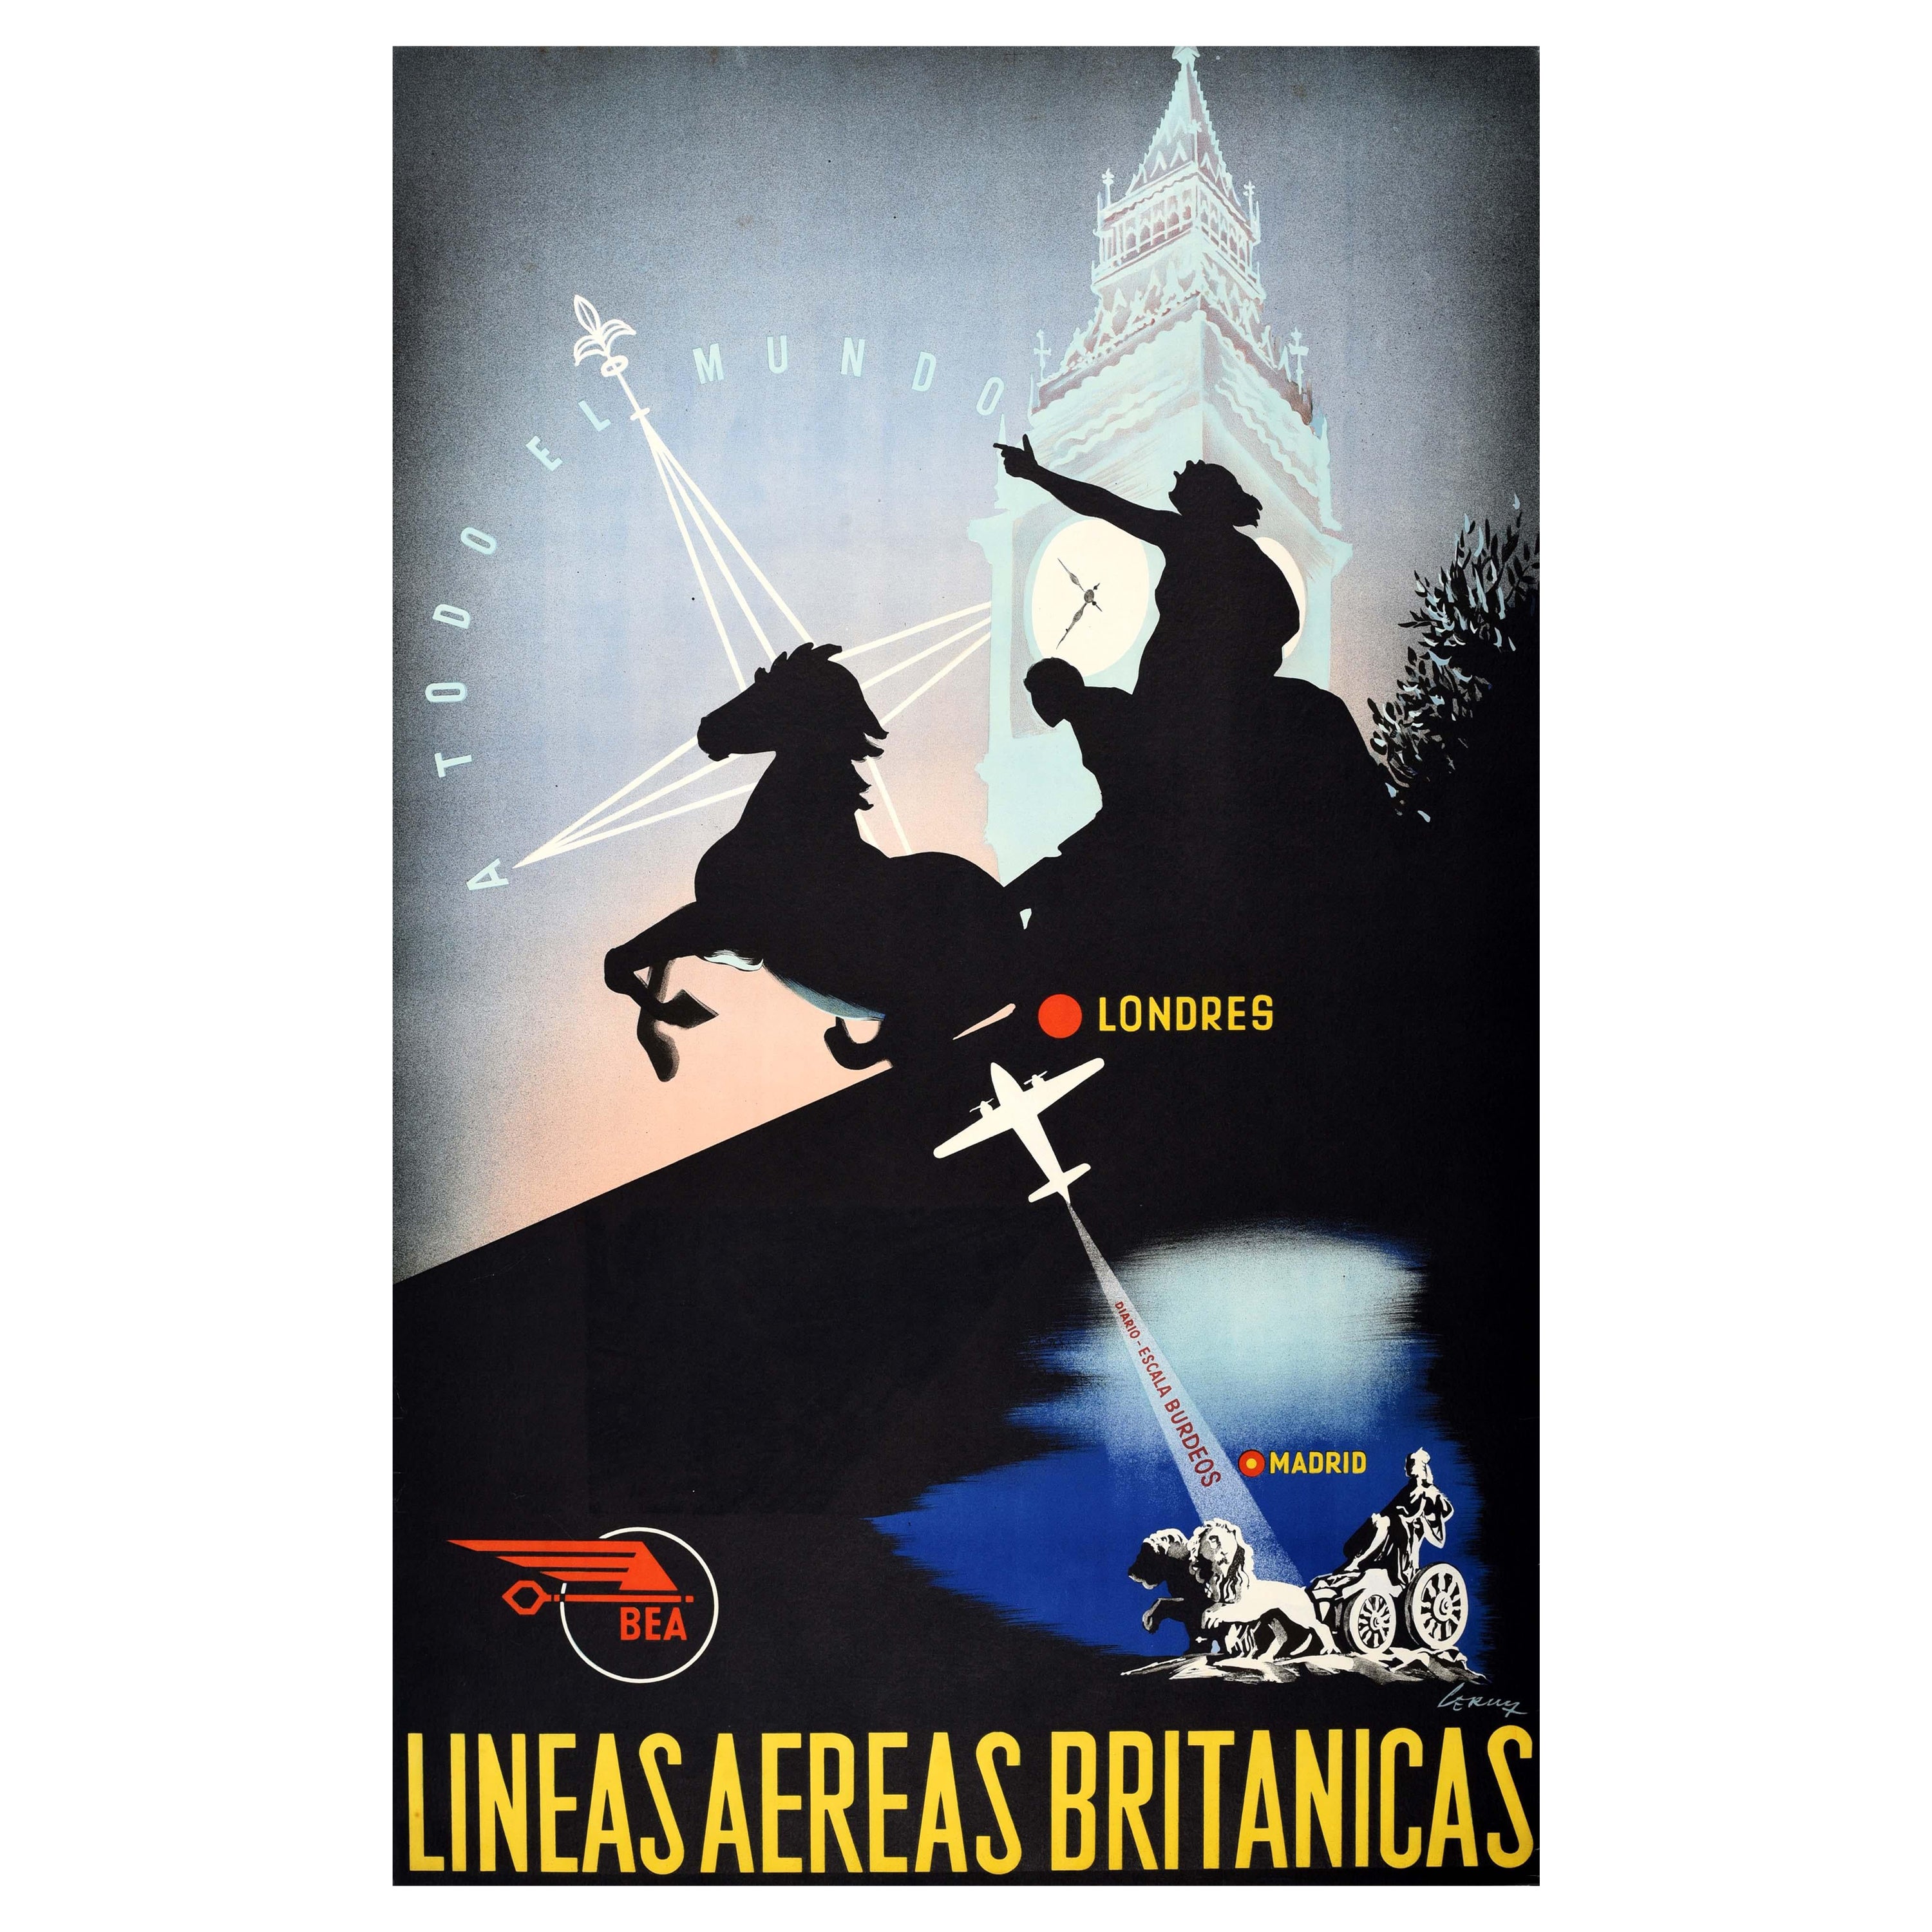 Original Vintage Airline Travel Poster Madrid To London BEA To The Whole World